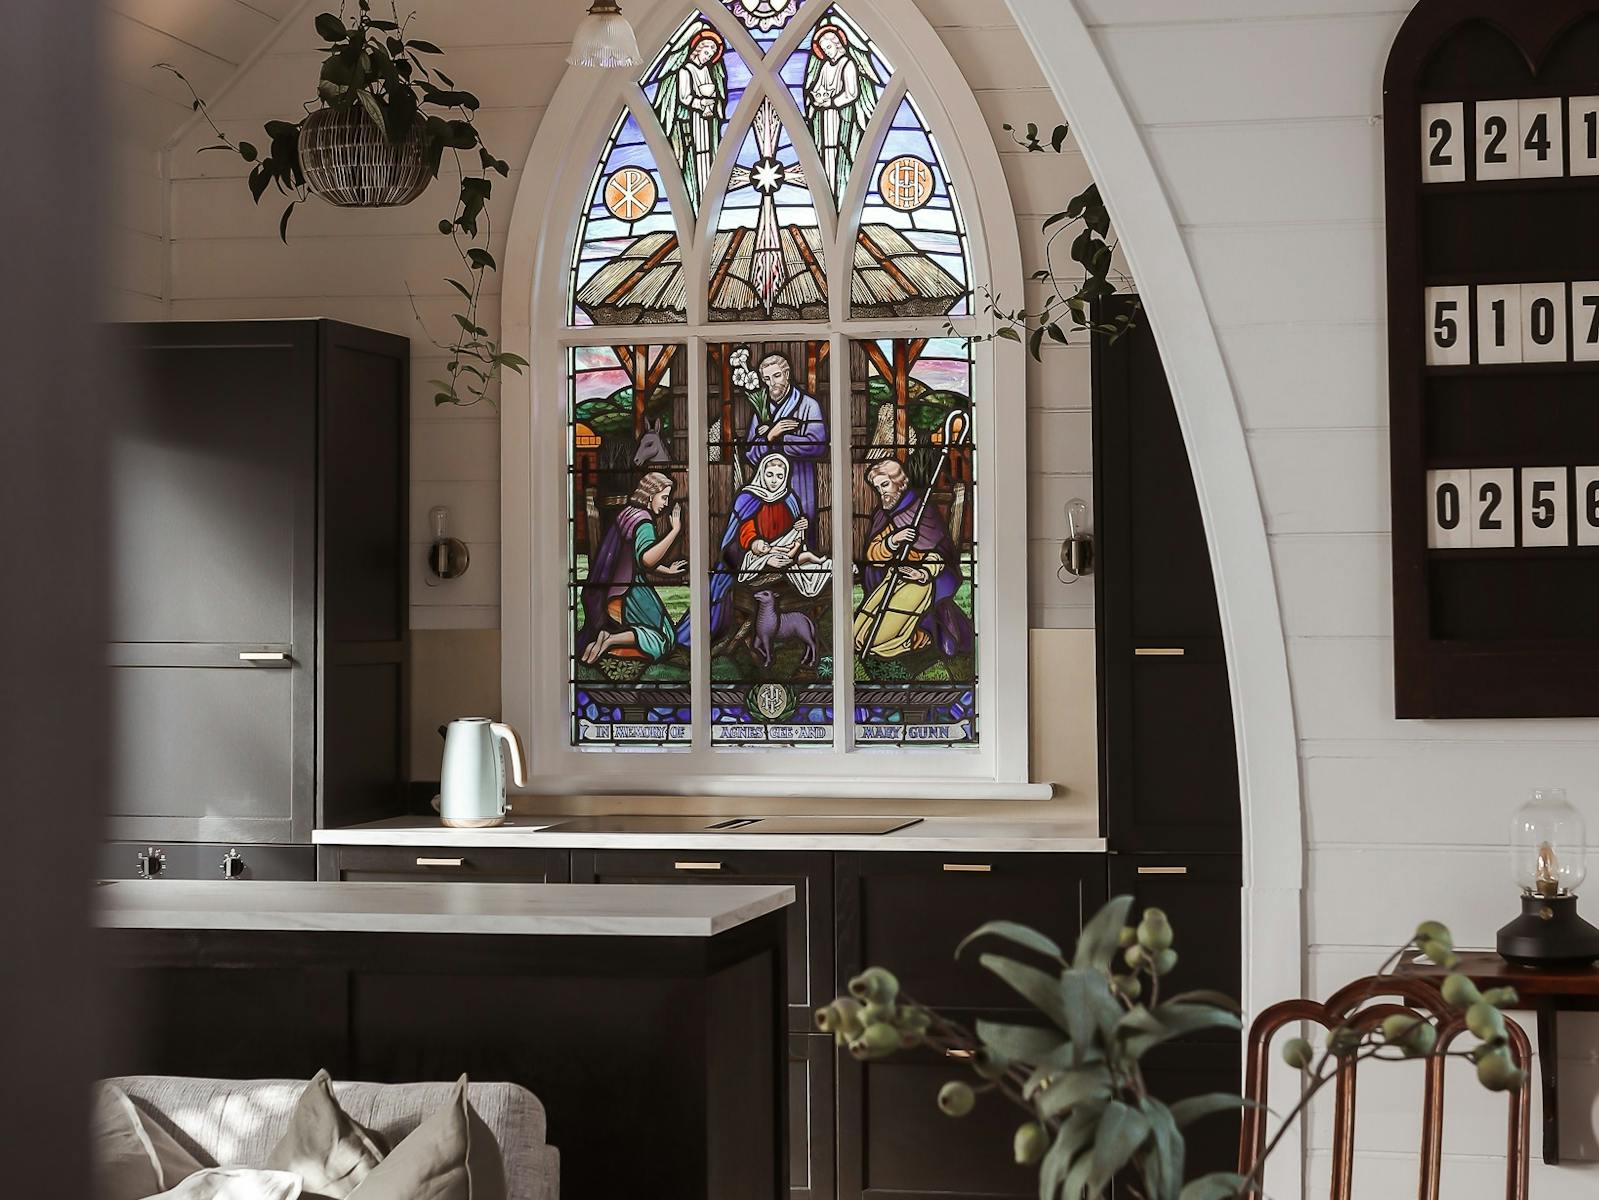 Stained Glass original in the Low Head Chapel, kitchen opens to sunny patio